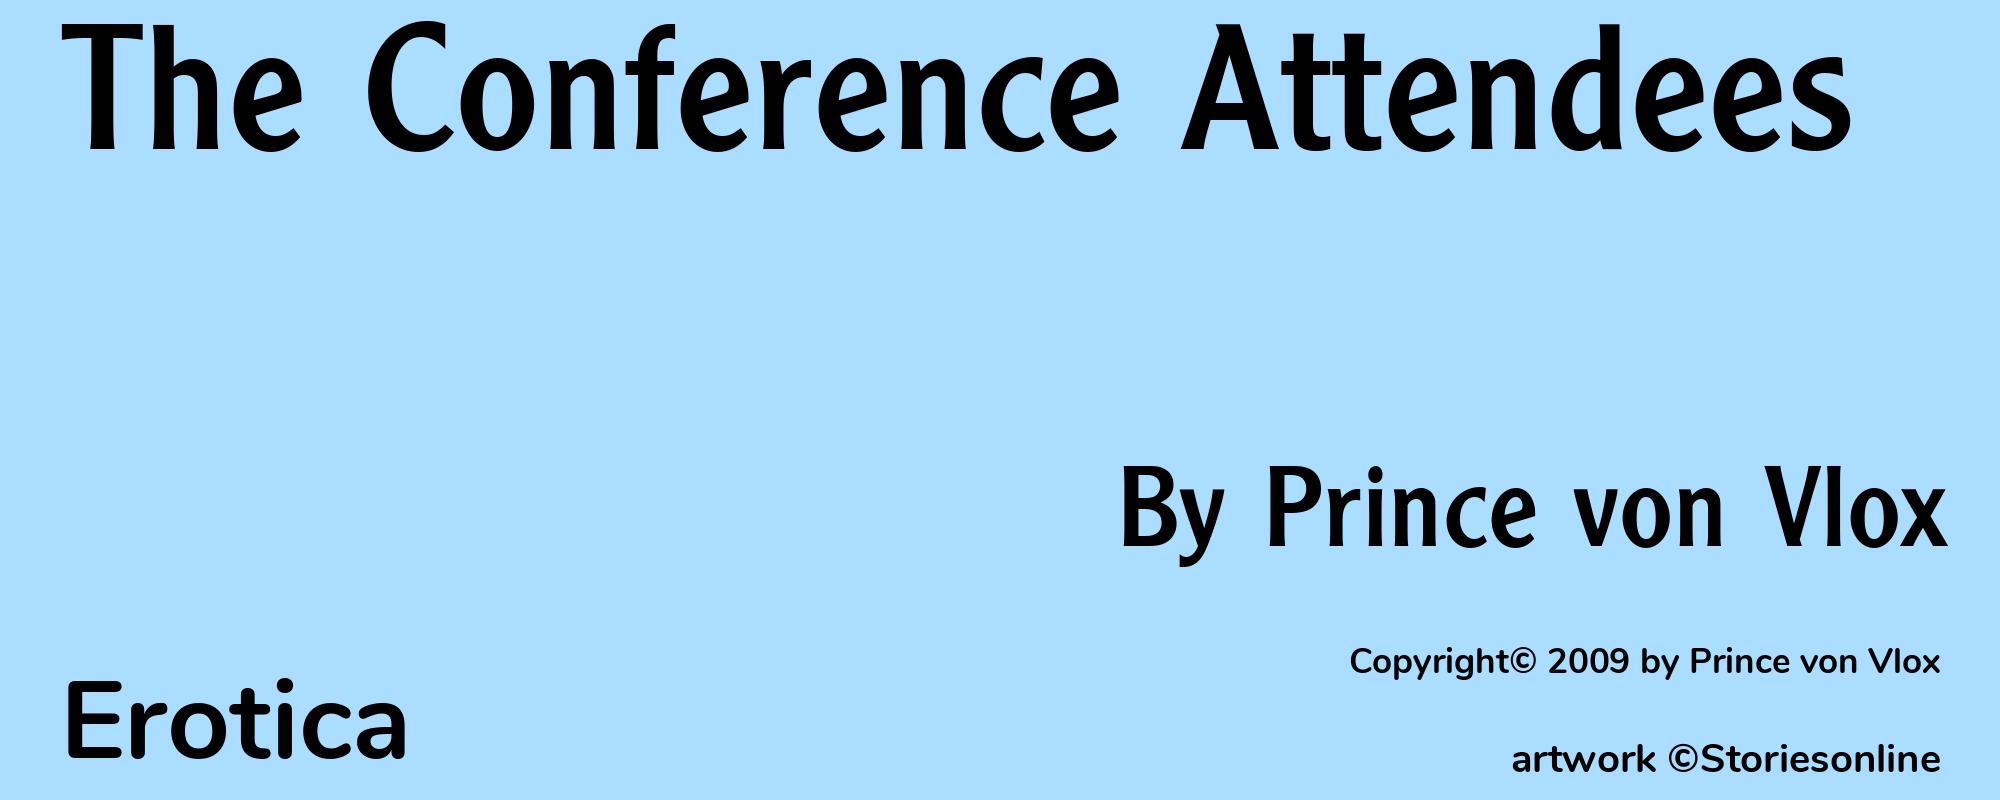 The Conference Attendees - Cover